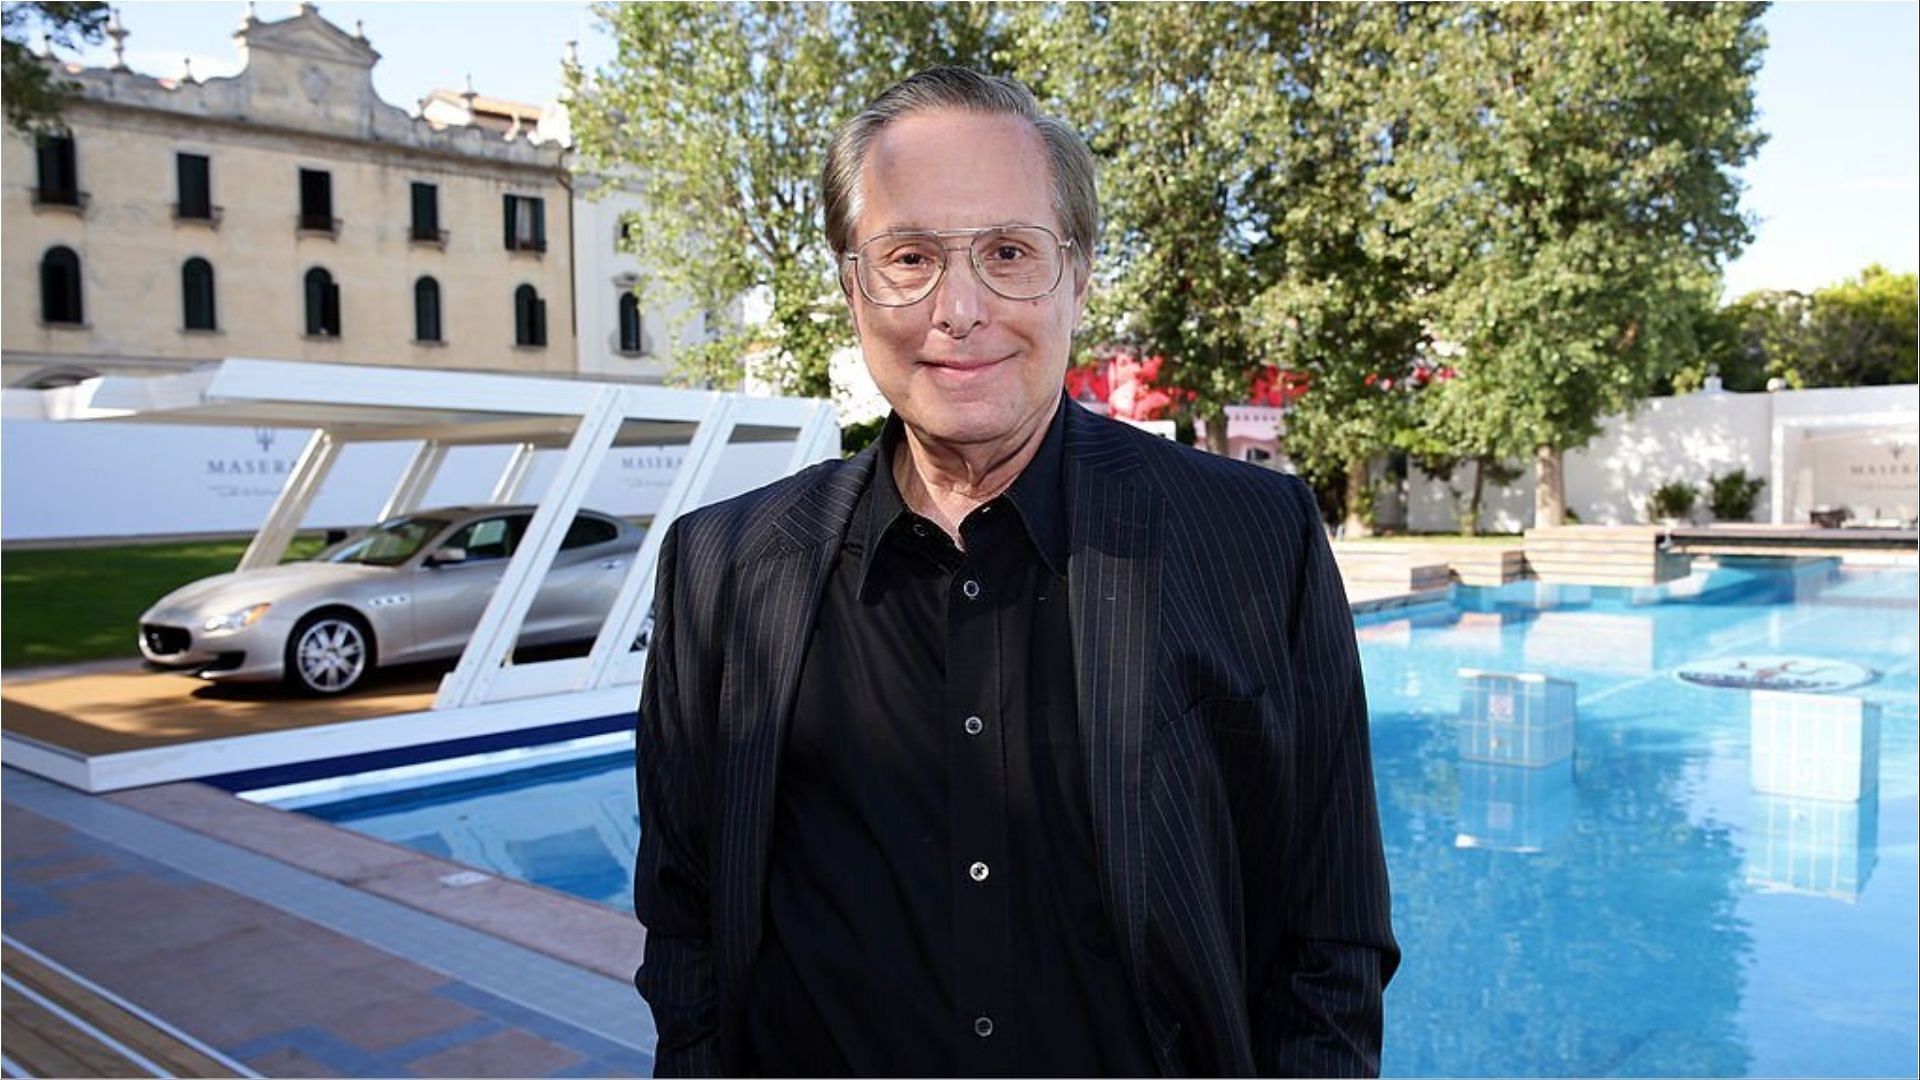 William Friedkin gained recognition as the director of The Exorcist (Image via Vittorio Zunino Celotto/Getty Images)